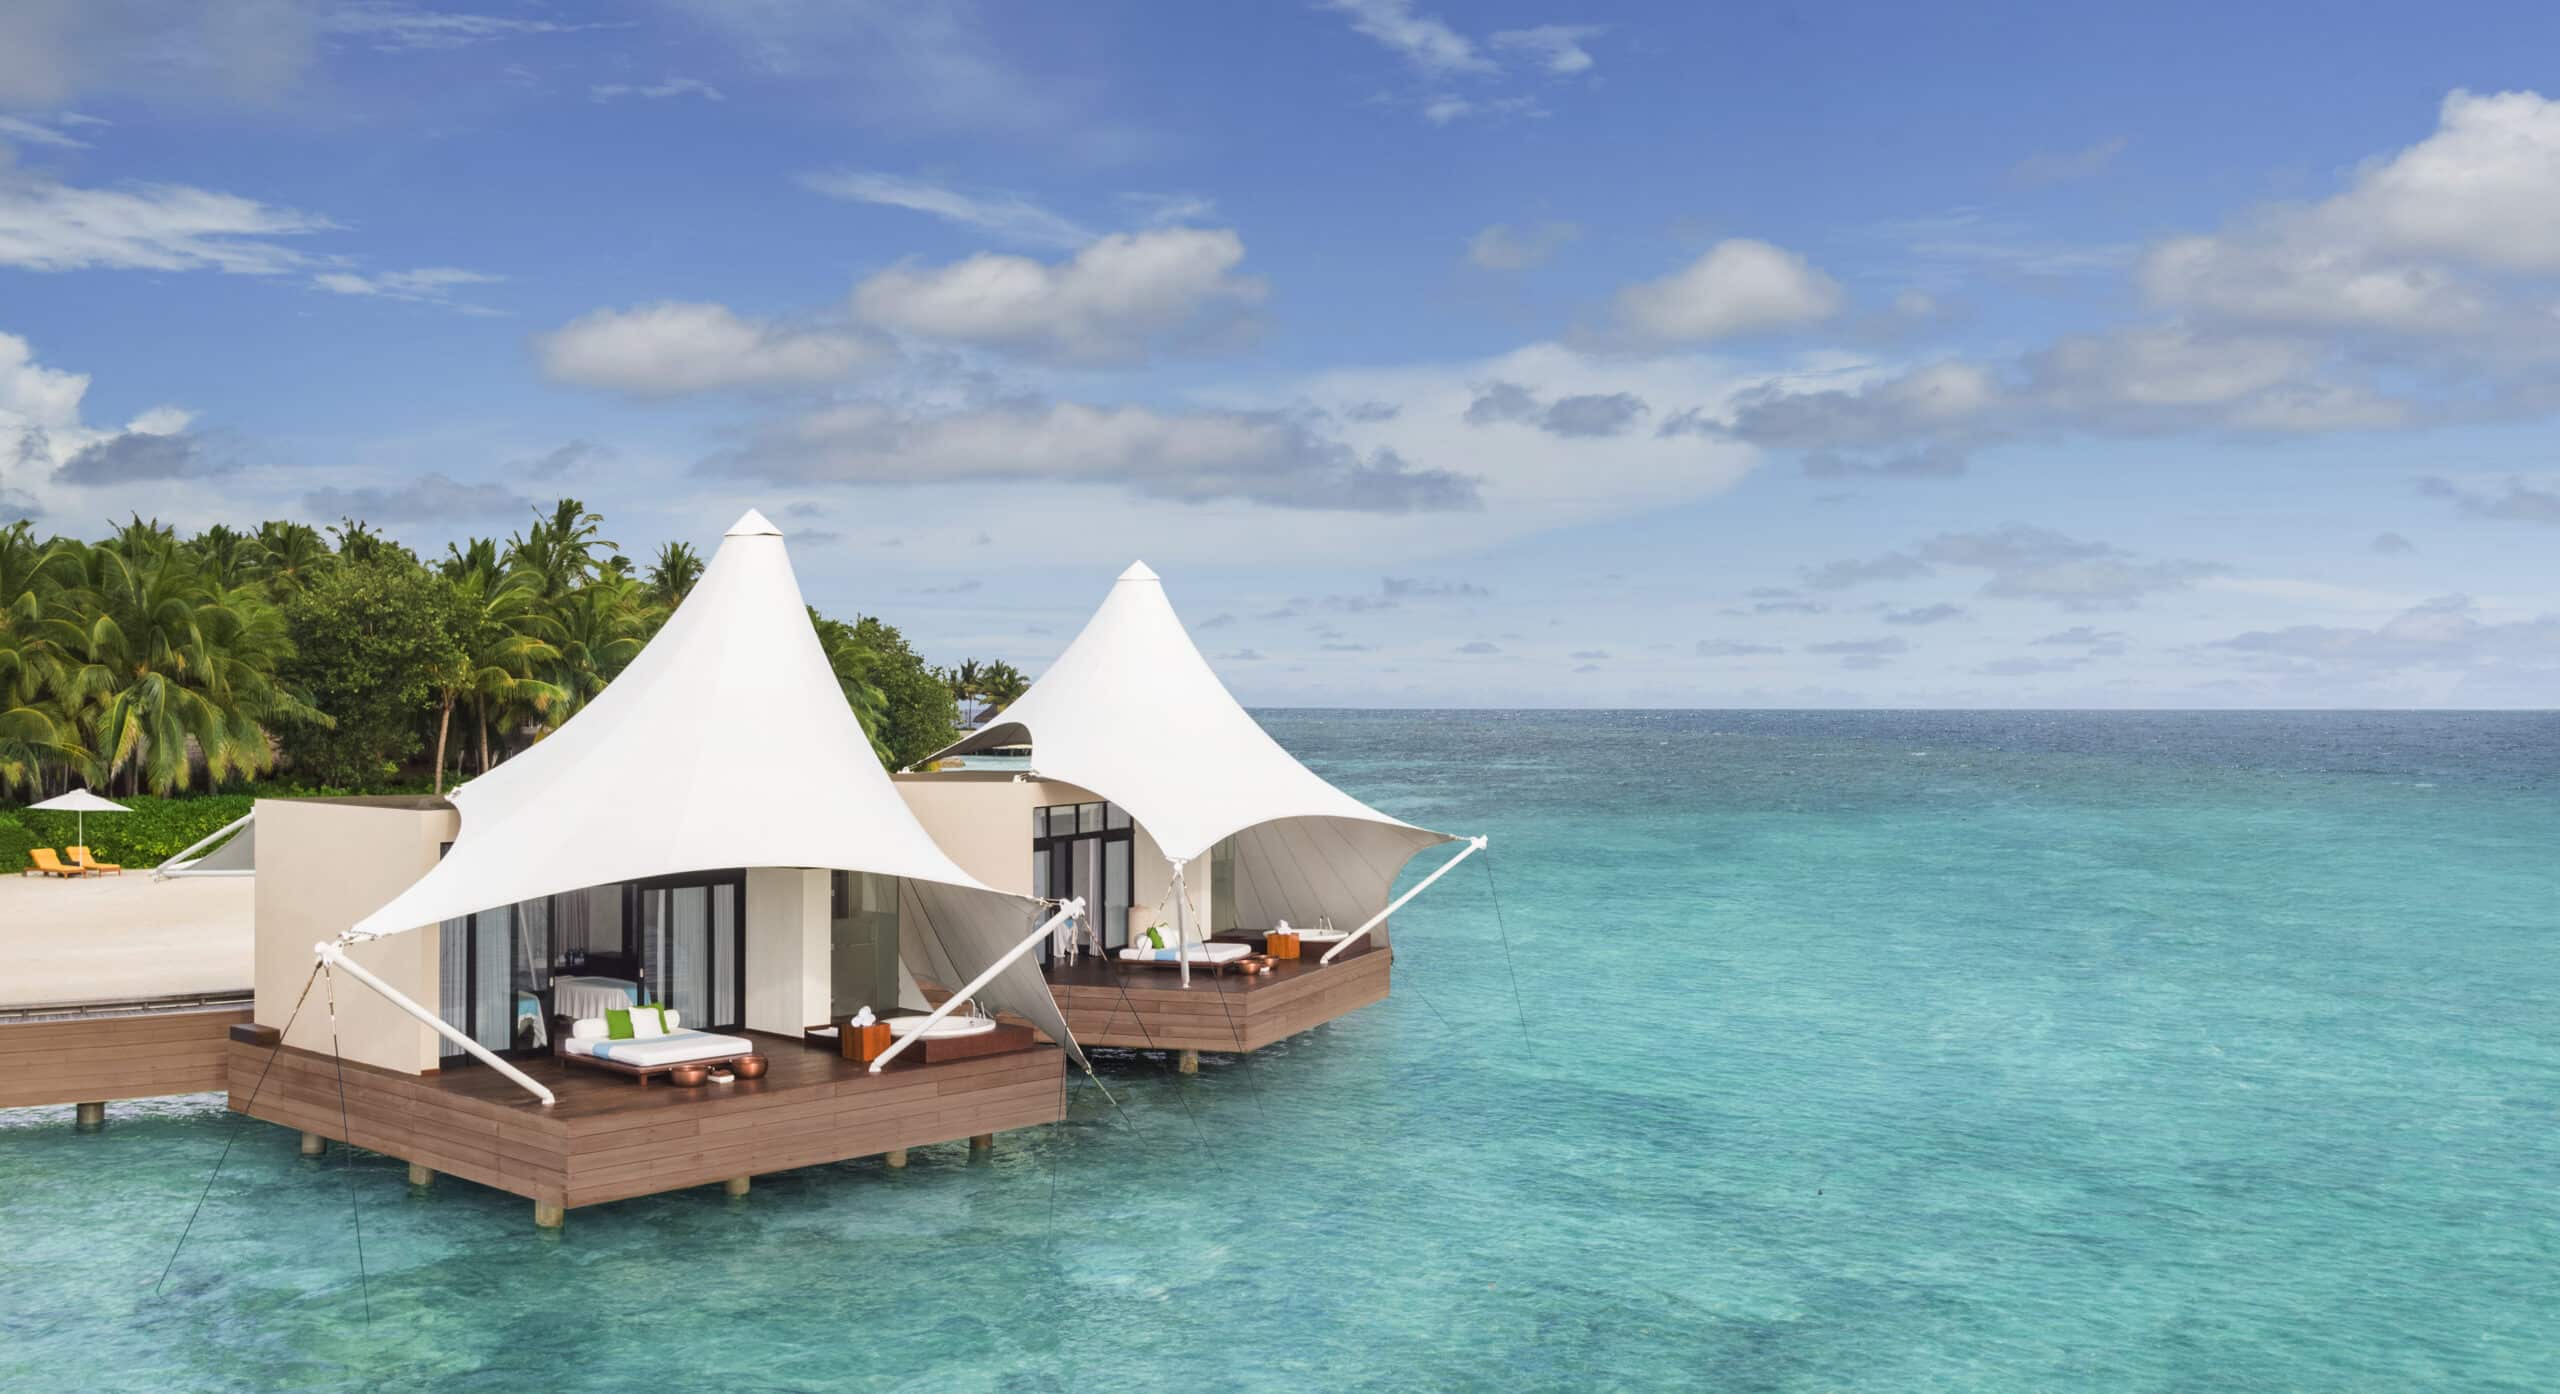 INDULGE IN STYLE THIS EID WITH THE ULTIMATE PARADISE GETAWAY TO W MALDIVES